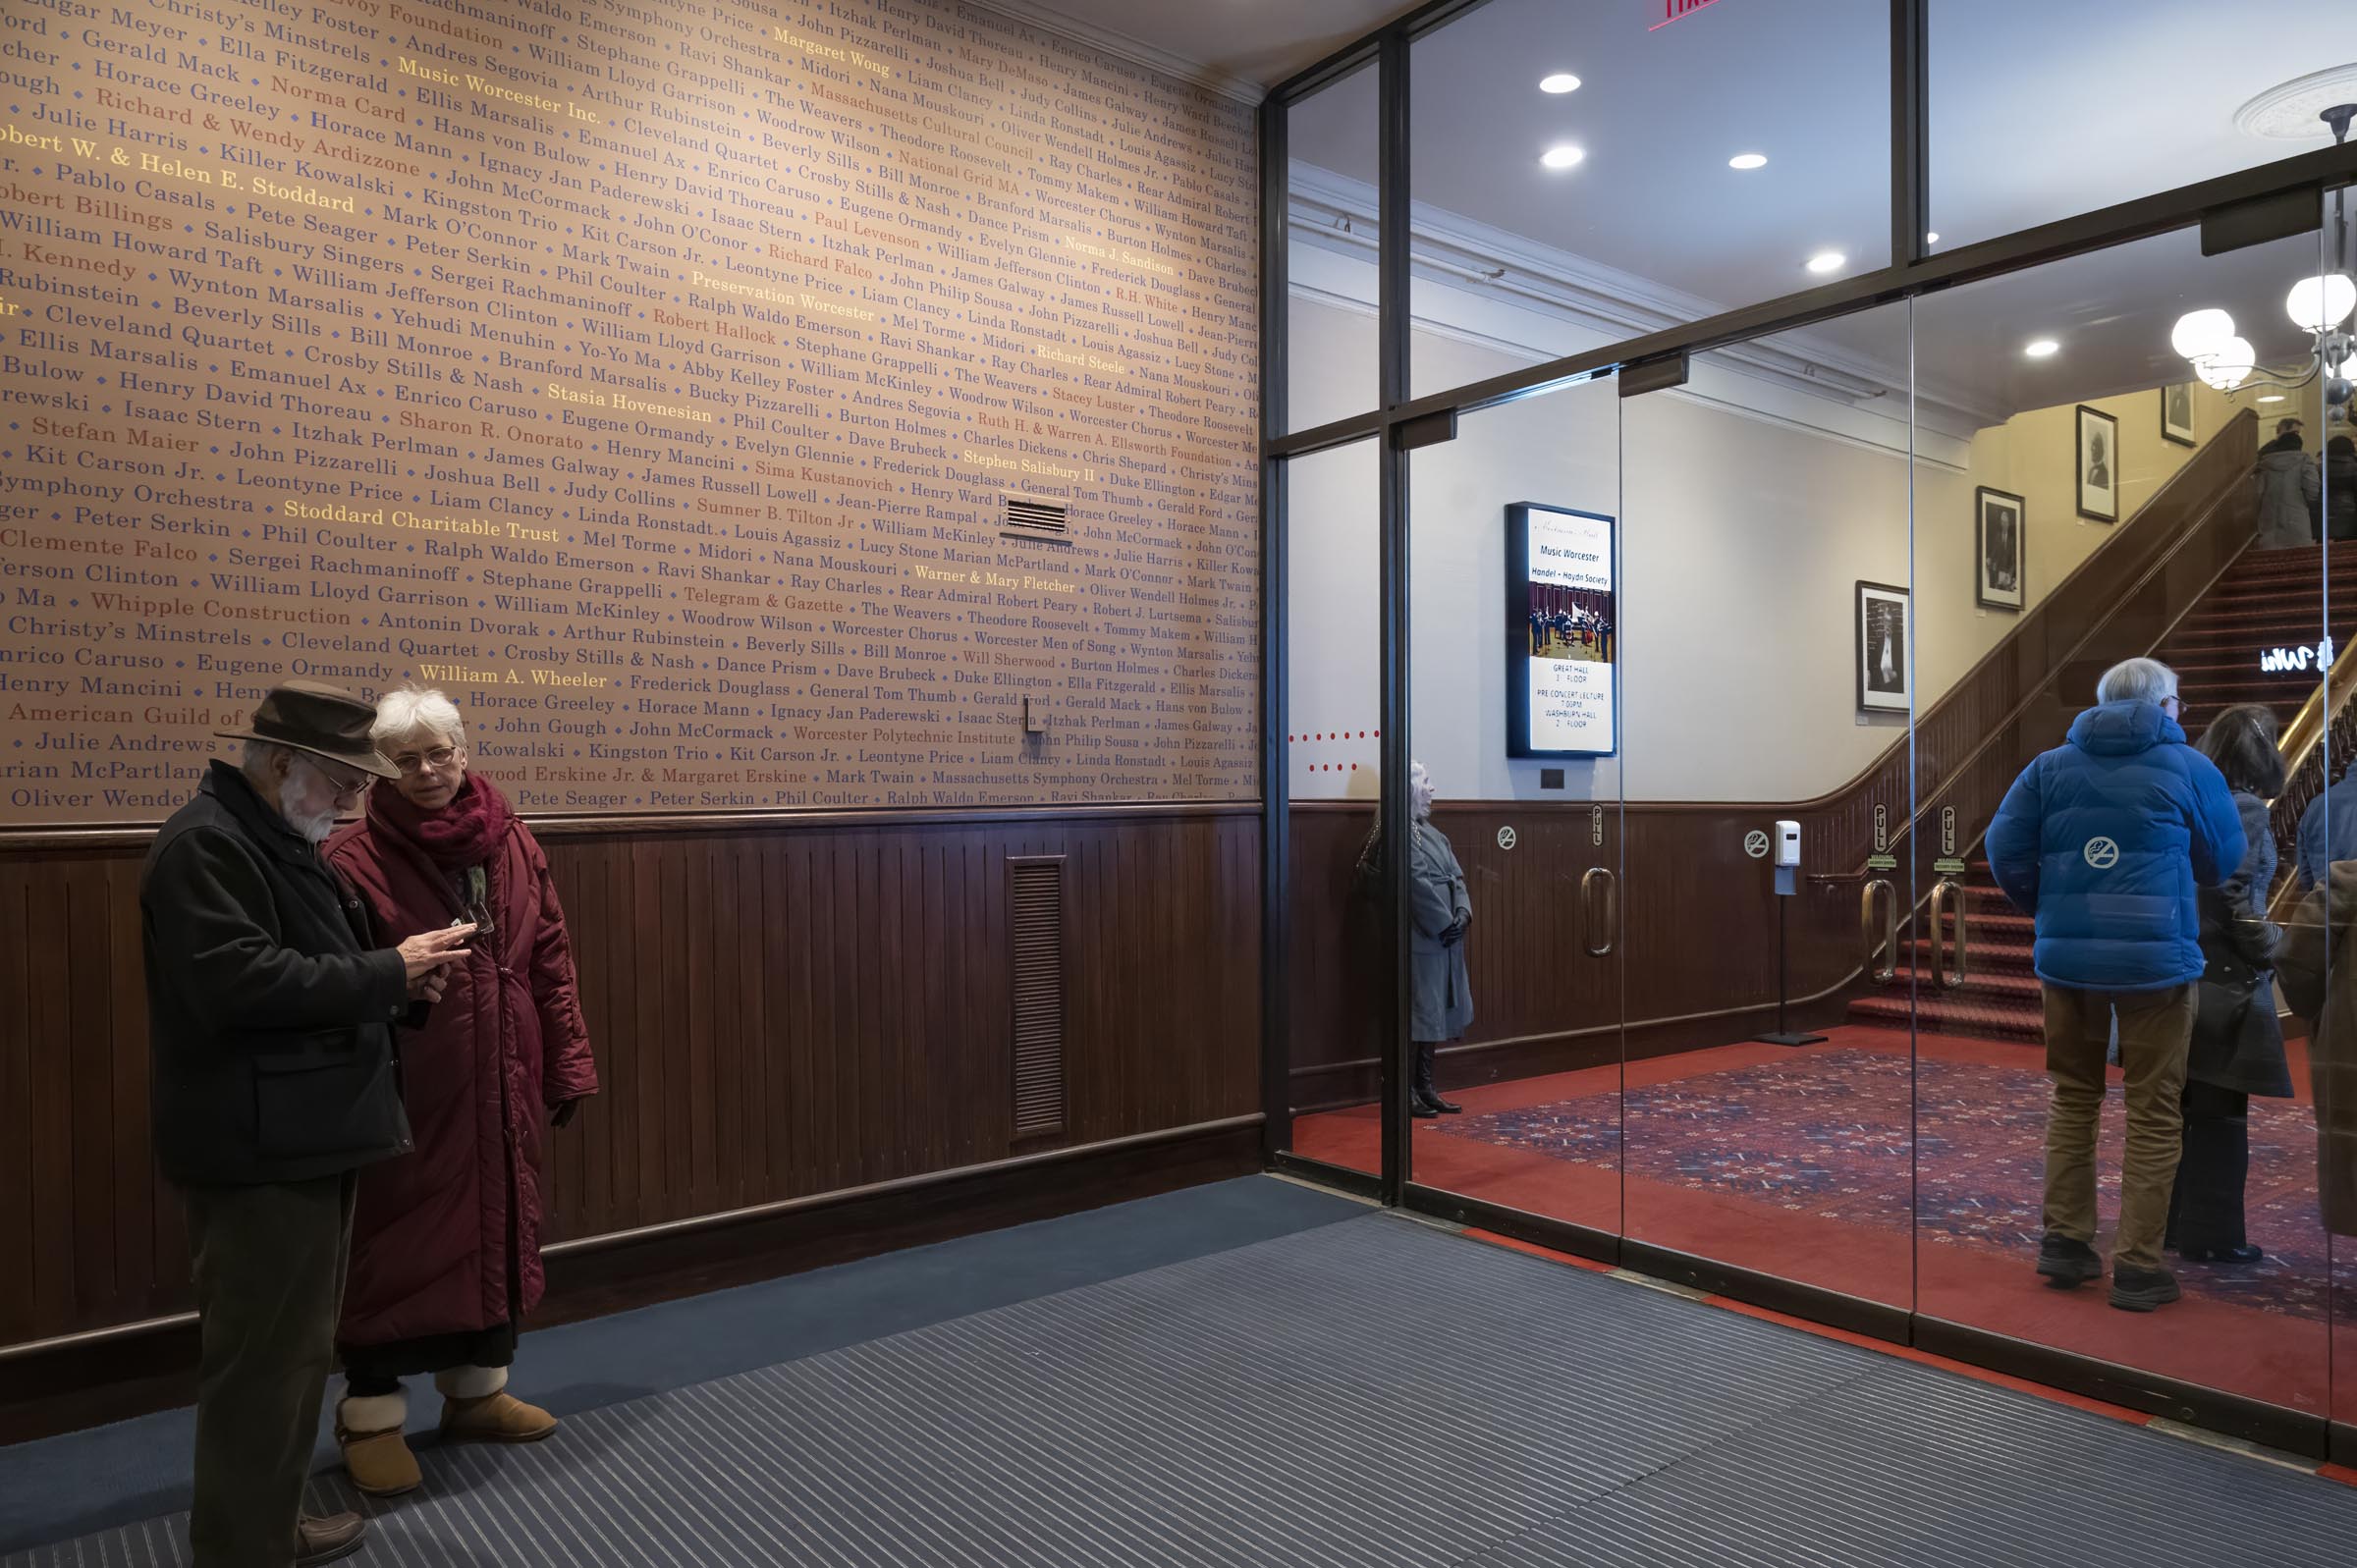 New outer lobby of Mechanics Hall with wainscoting and wallpaper, new digita messagin is visible through the glass